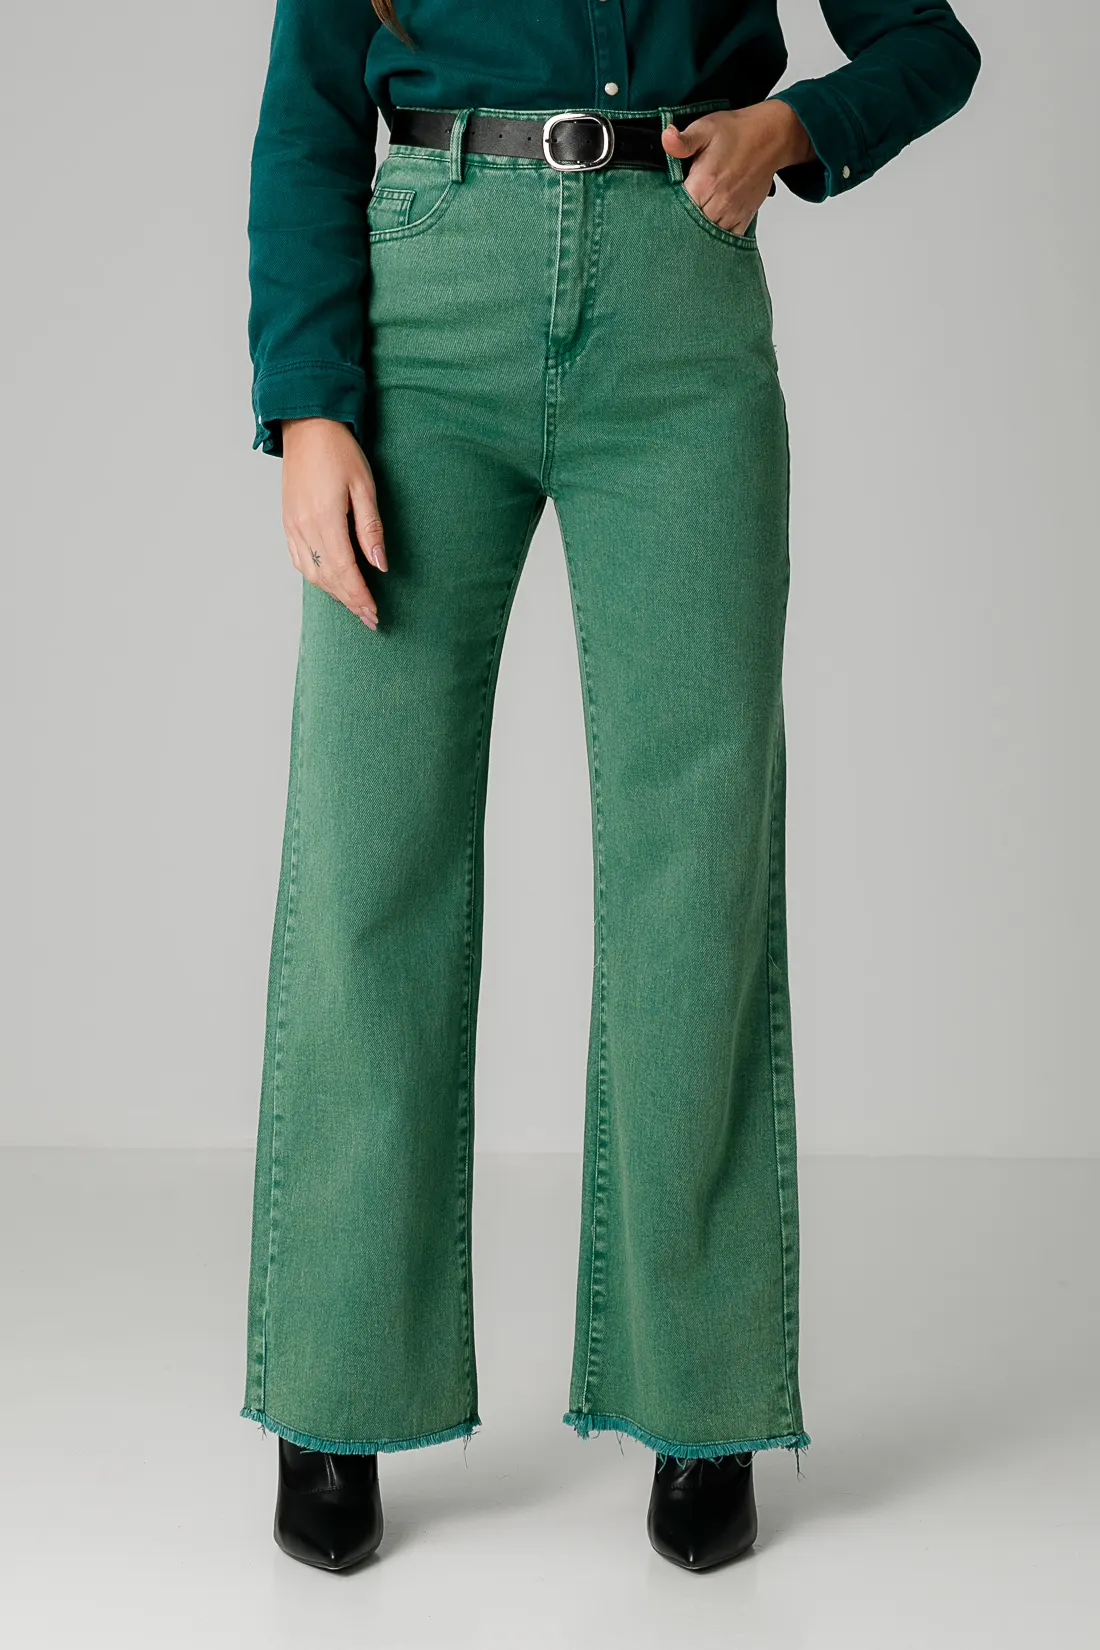 LODINES TROUSERS - GREEN